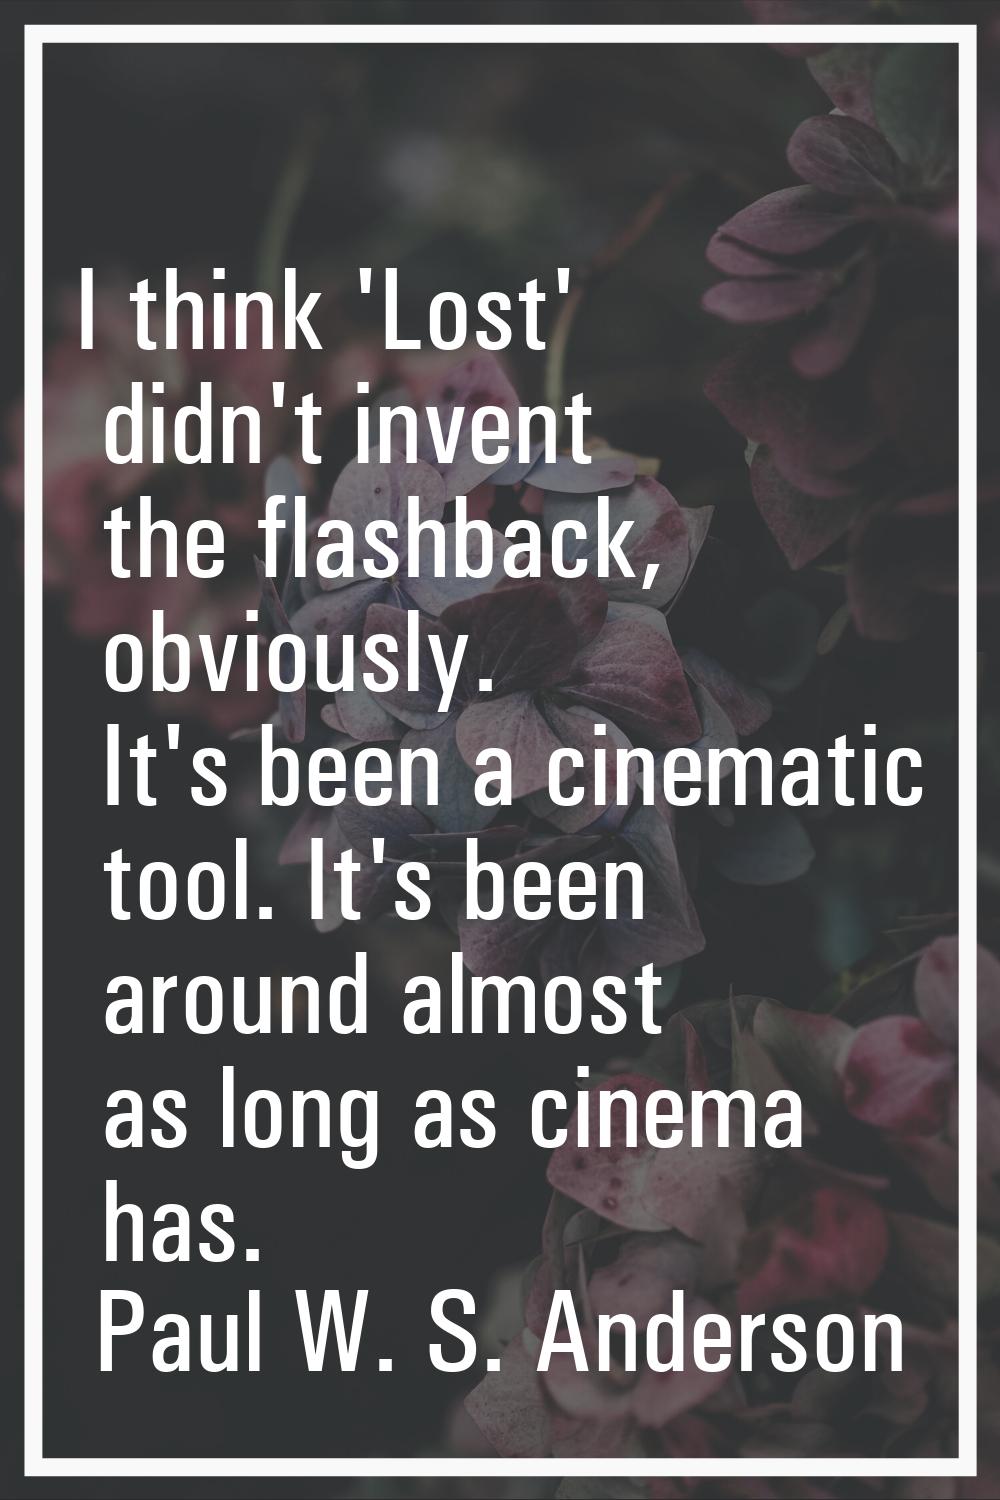 I think 'Lost' didn't invent the flashback, obviously. It's been a cinematic tool. It's been around